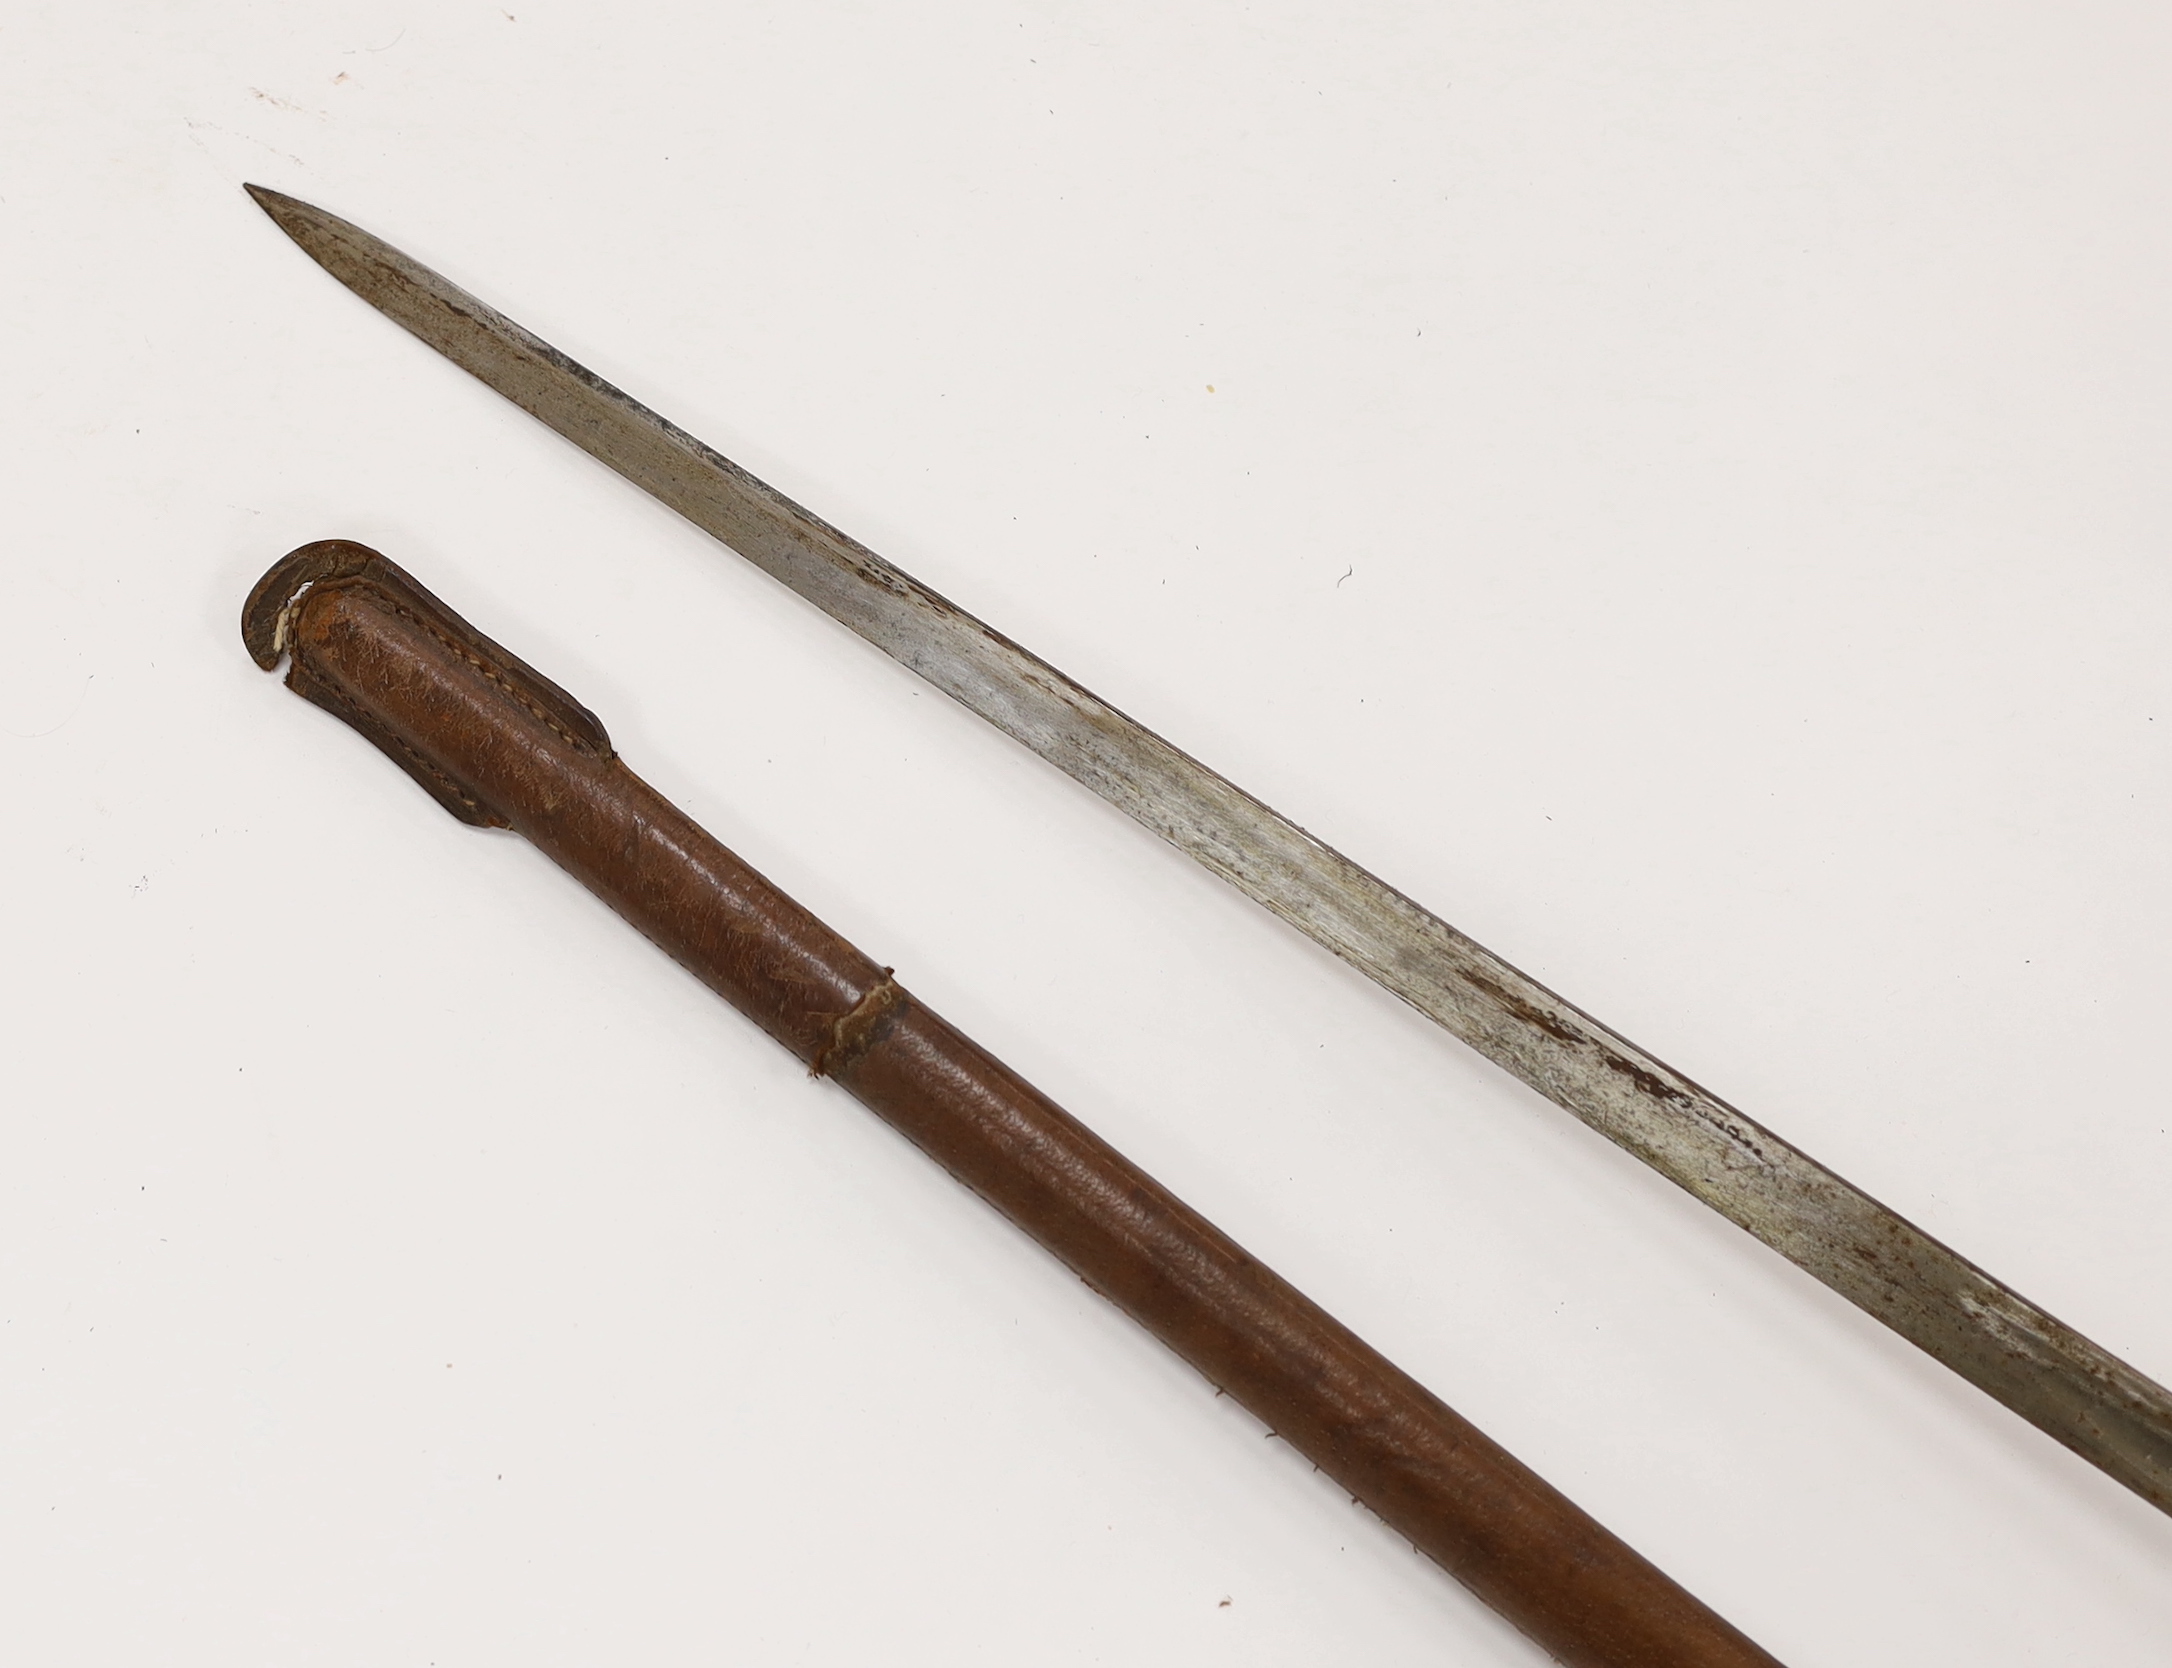 A George V 1897 pattern infantry officer's sword, with scabbard and leather hanger, blade 82cm